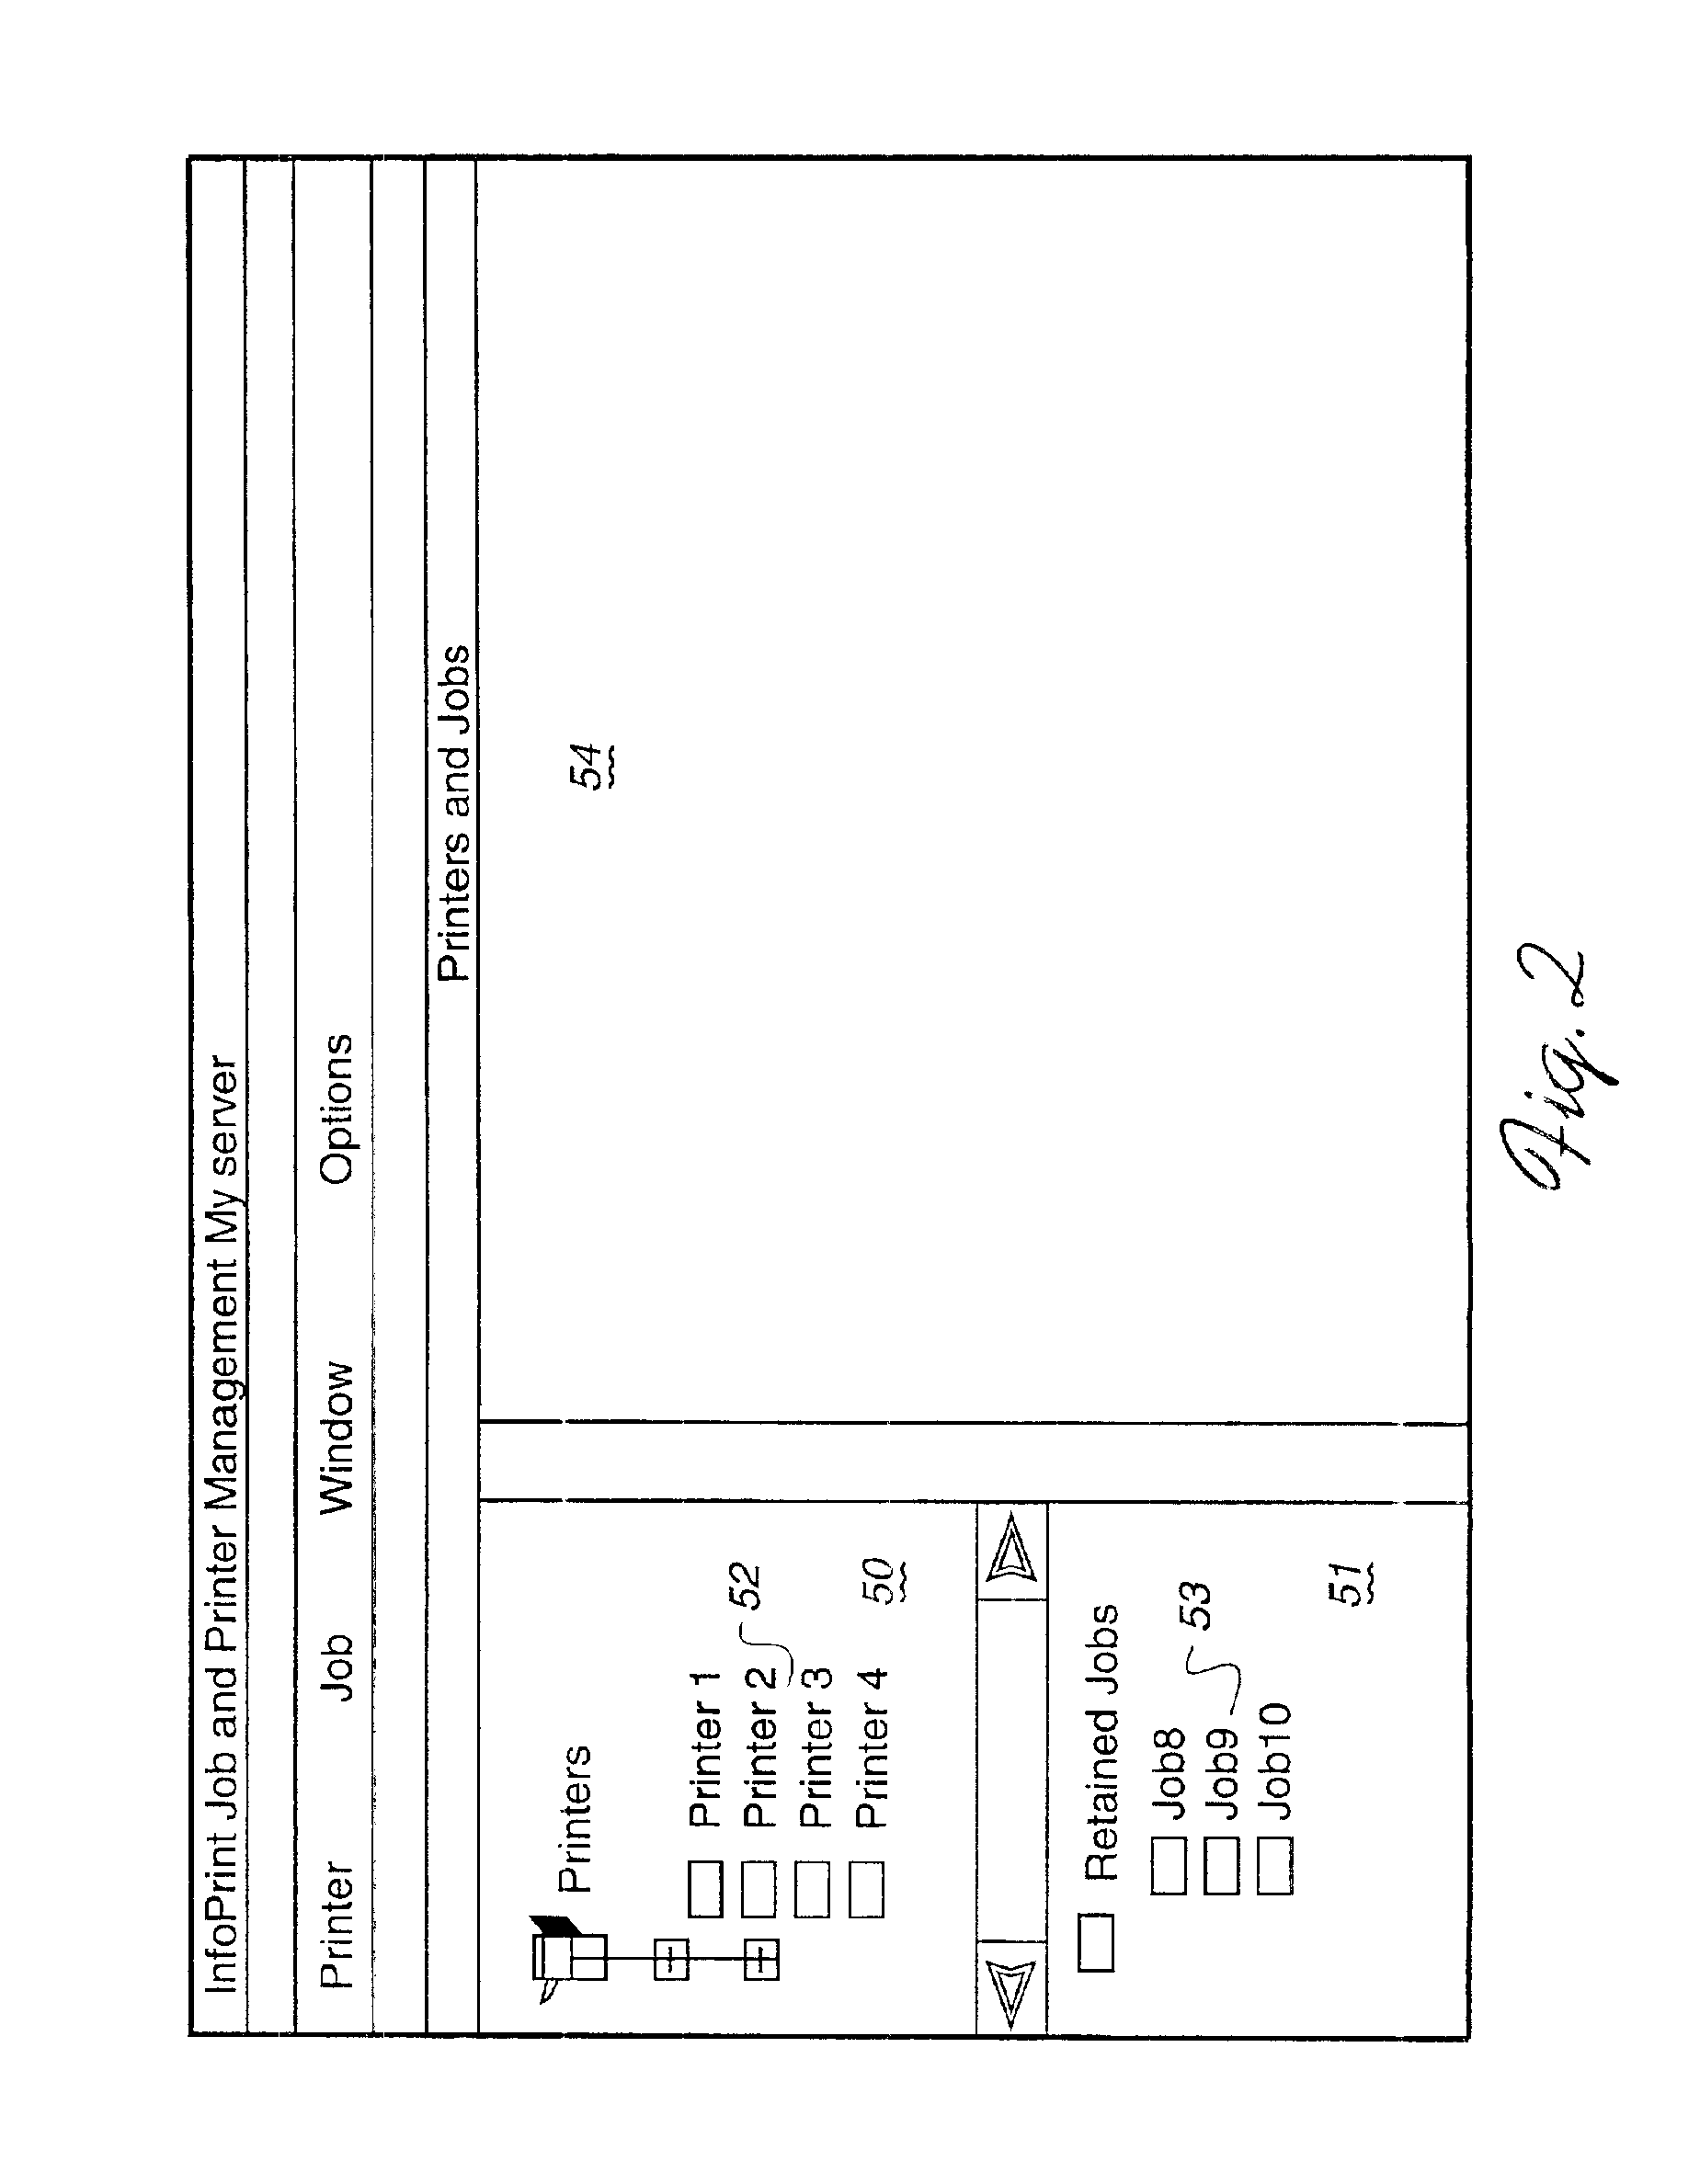 Method, system, and program for selecting devices to use to execute selected tasks in a graphical user interface